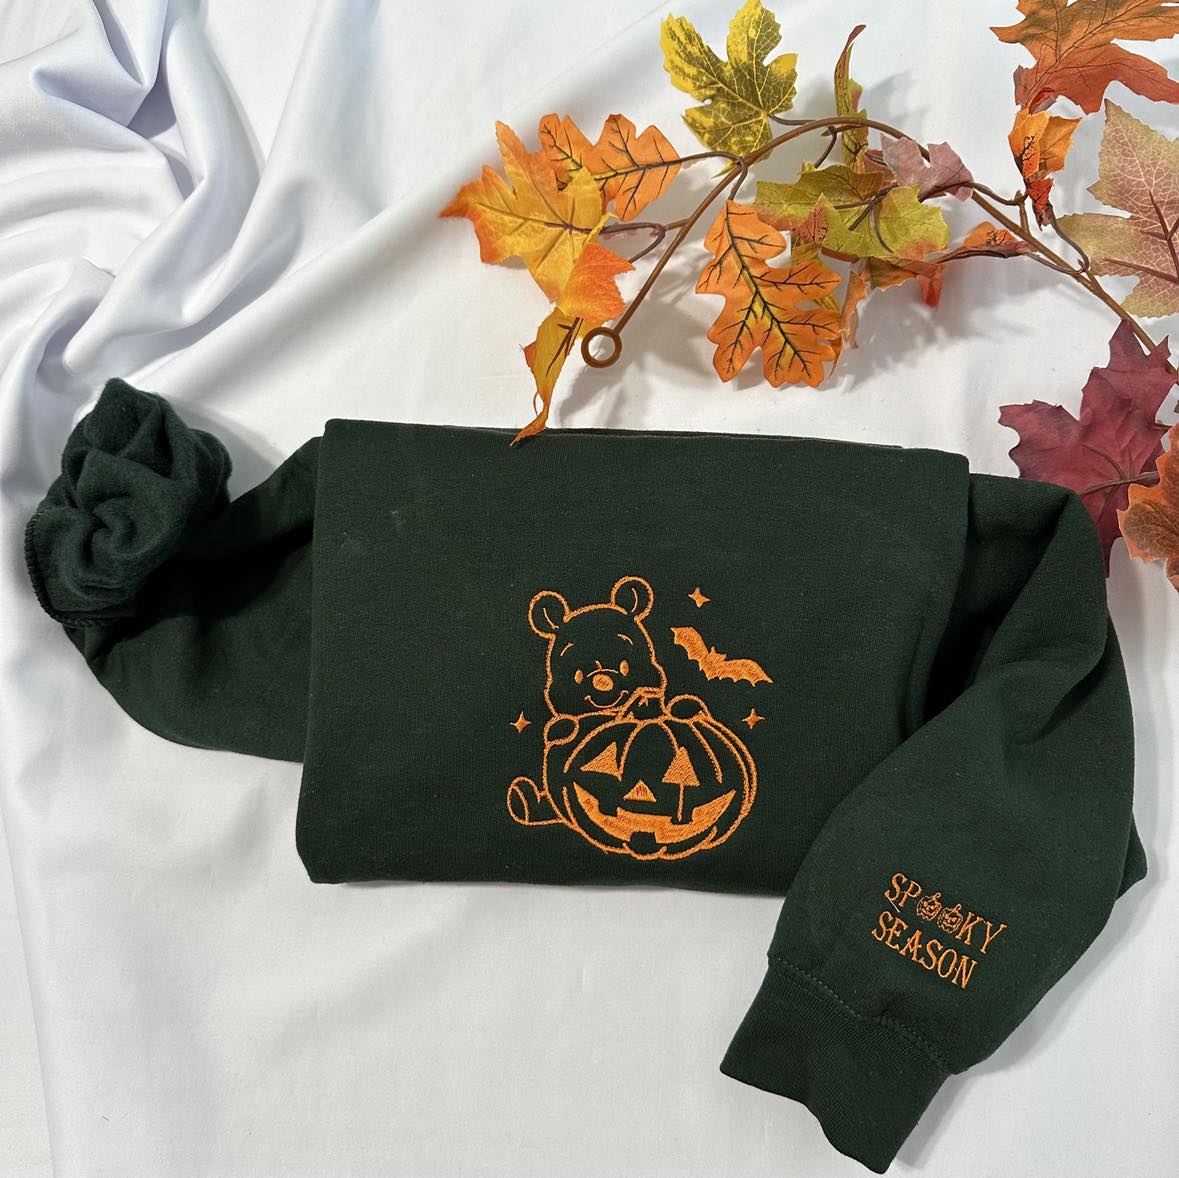 Halloween Winnie the Pooh embroidered sweatshirt with a spooky season embroidered on the cuff; Halloween Pumpkin embroidered sweatshirt